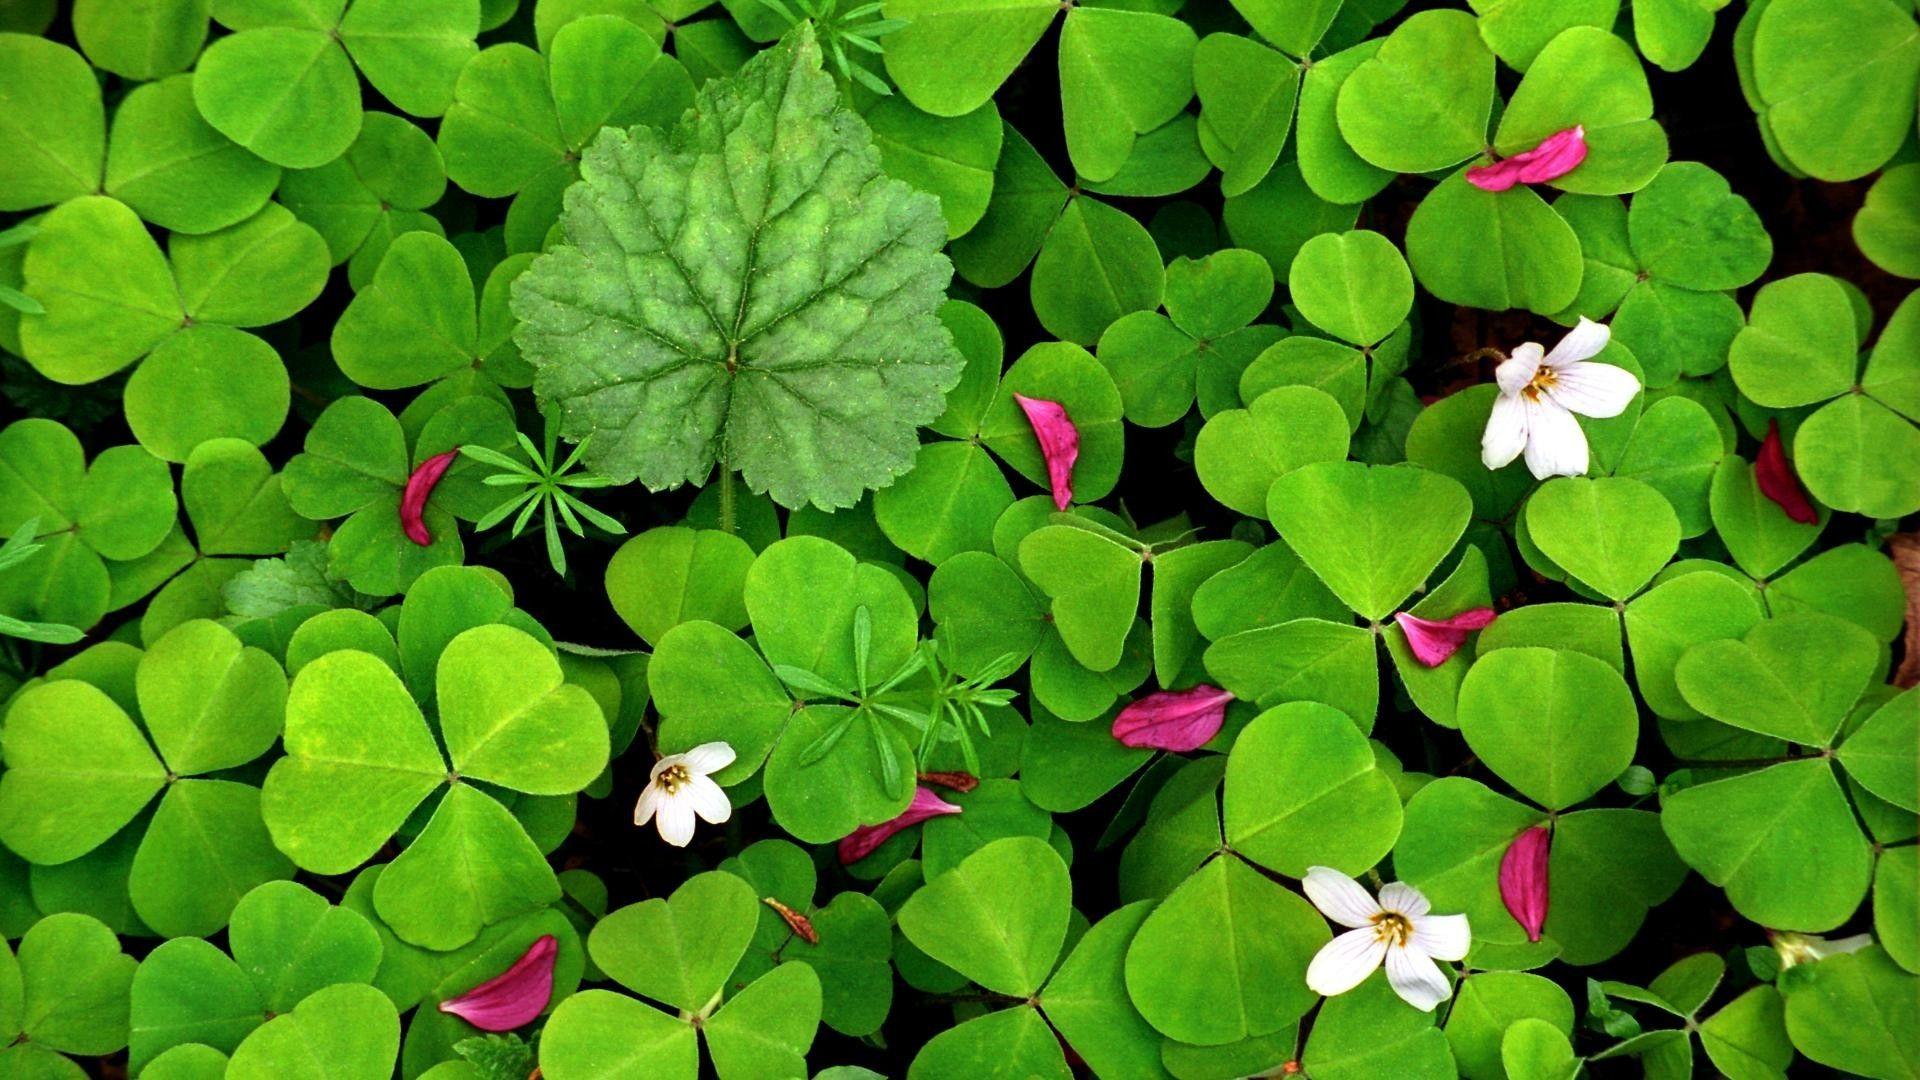 Four Leaf Clover Wallpapers - Top Free Four Leaf Clover Backgrounds